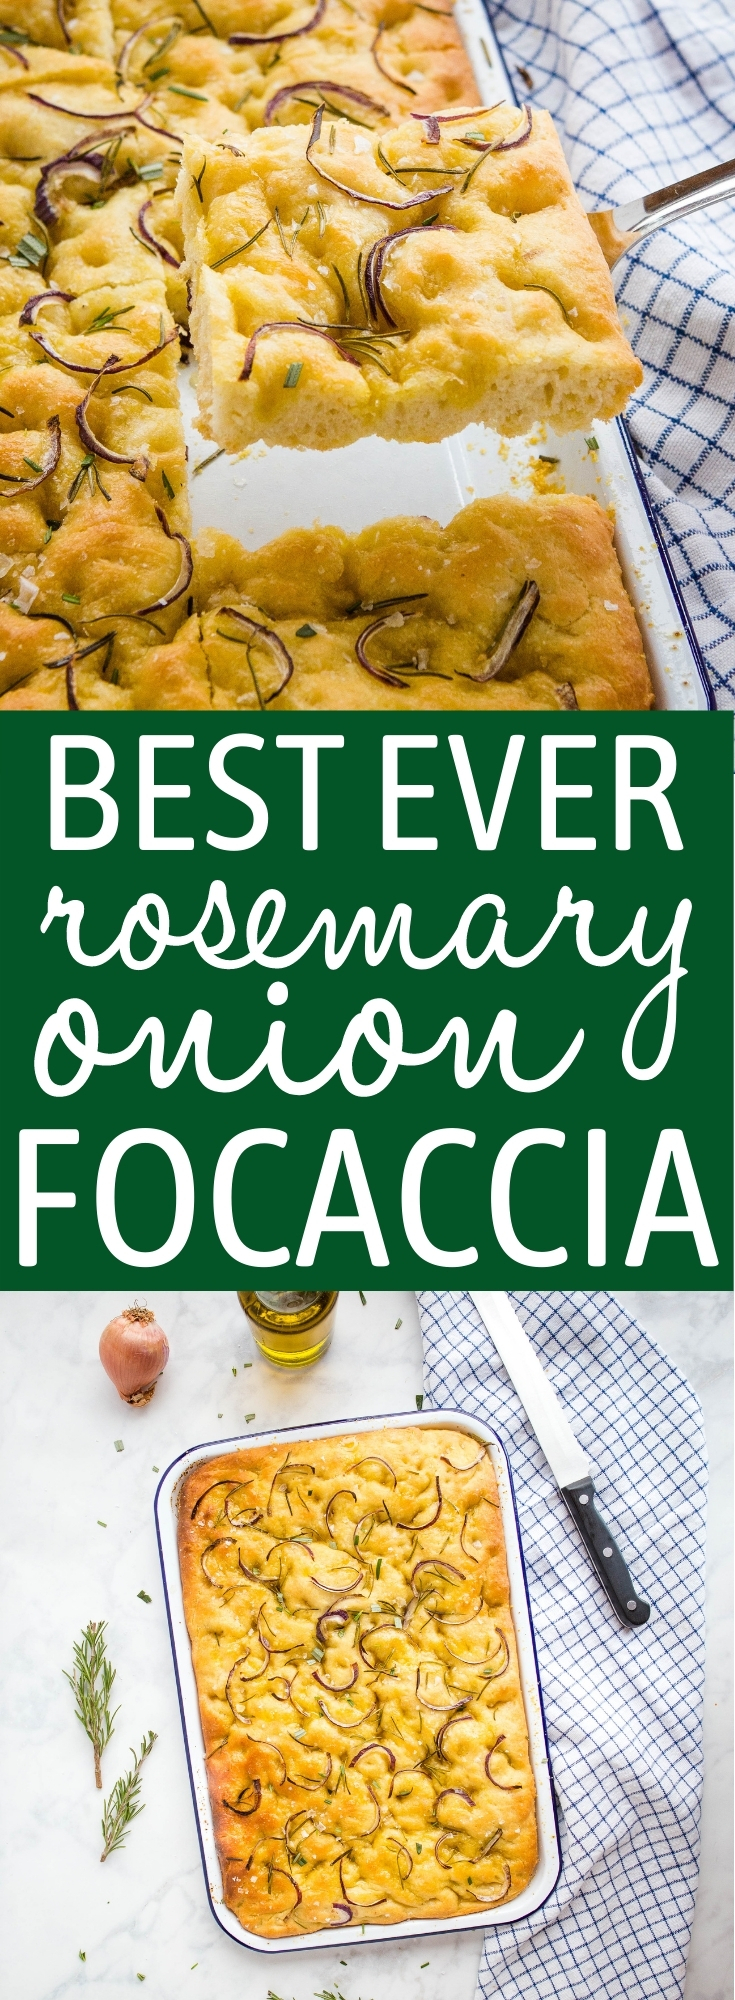 This Best Ever Rosemary Focaccia Bread is restaurant quality! The perfect classic Italian-style focaccia that's soft and chewy, made with roasted onions and rosemary! Recipe from thebusybaker.ca! #focaccia #bread #italian #homemade #restaurant #secretingredient #easy #bread #homemadebread #recipe #tutorial via @busybakerblog